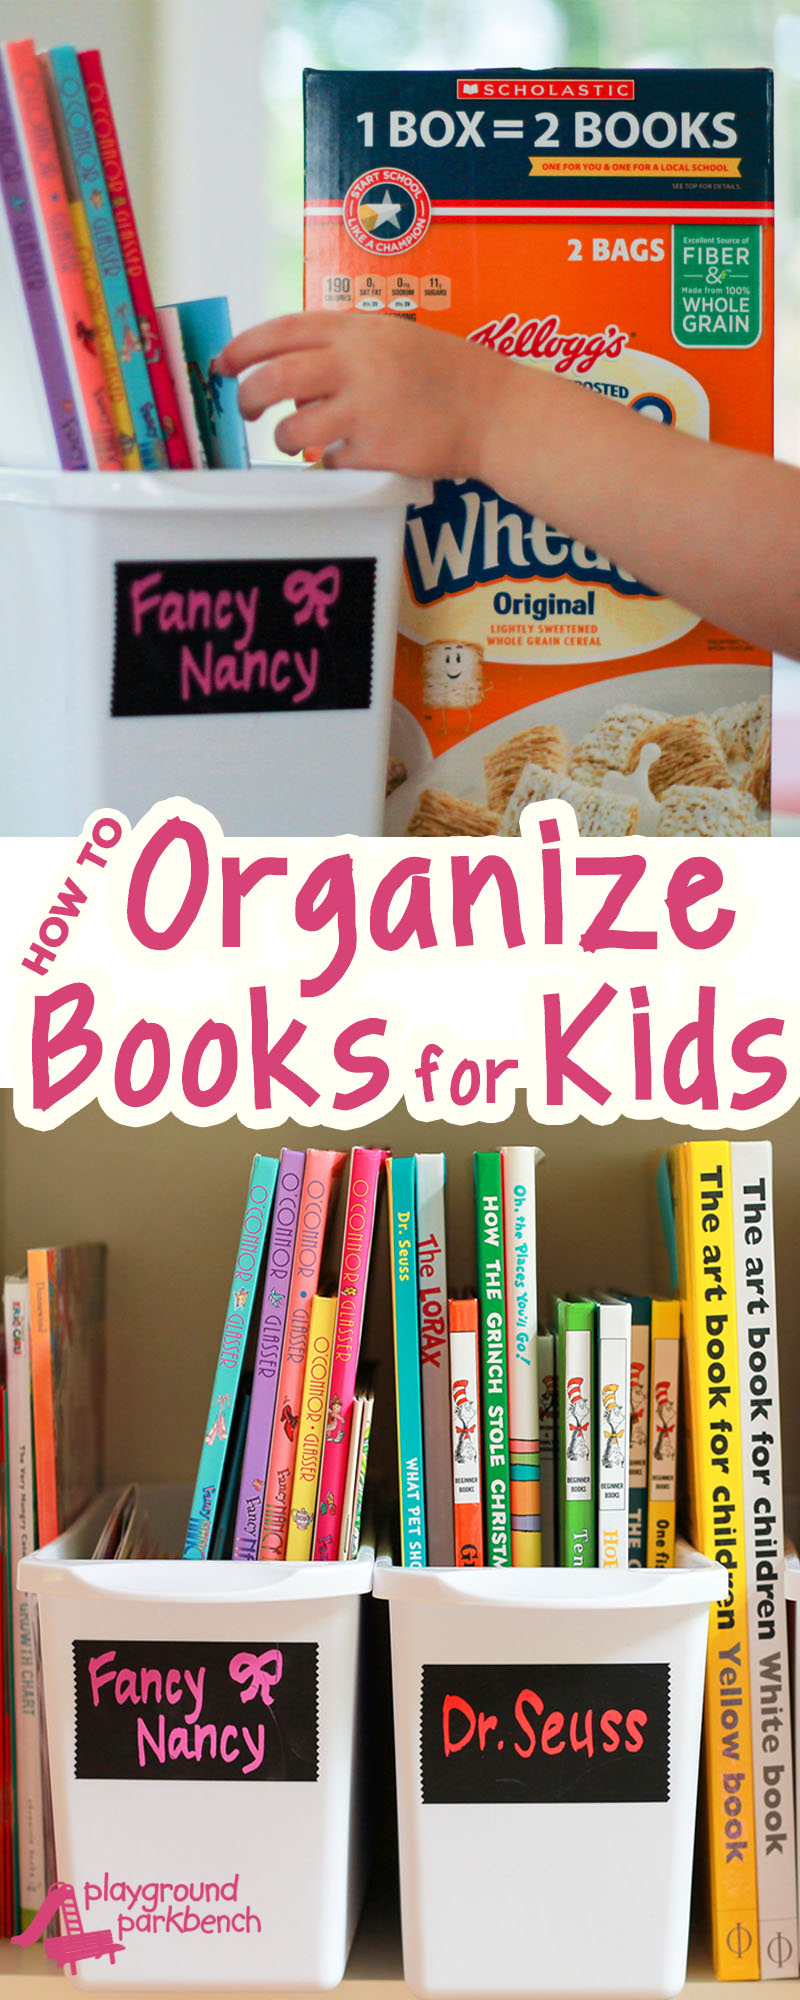 Can't find your child's favorite bedtime story in the mess of books on their shelves? A simple strategy to organize books that will help your kids keep them that way! And you'll need it with all the FREE books you can earn shopping for back to school at Sam's Club. #SamsClubBTS #StartSchoolLikeAChampion #Pmedia #ad | Playroom Organization | How to Be Organized | Back to School | Children's Books | Book Organization